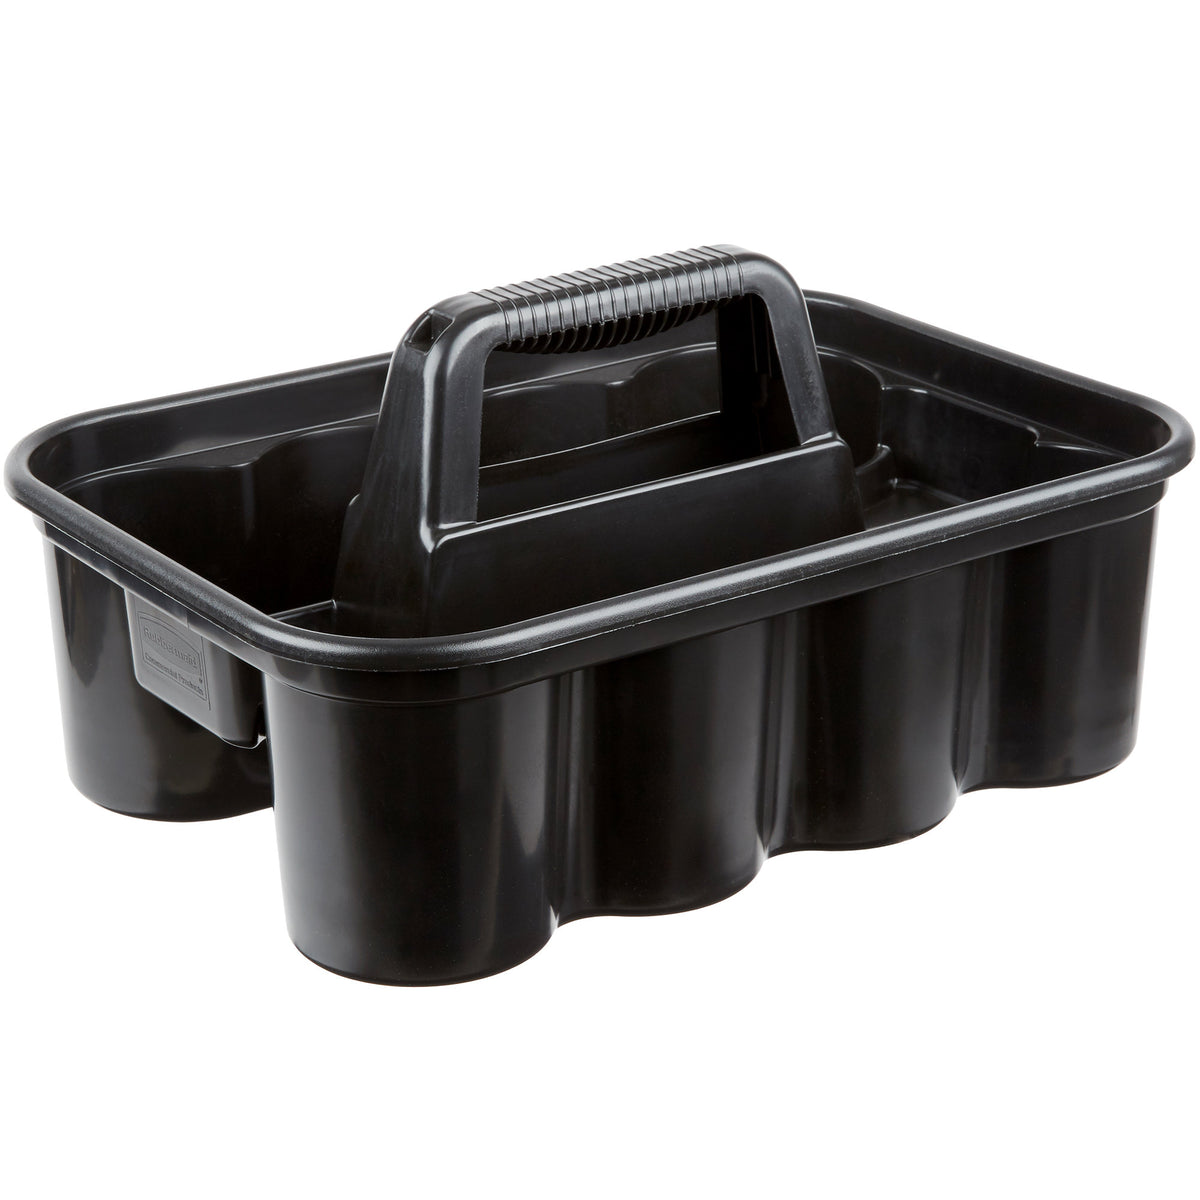 Bisupply Large Cleaning Caddy Organizer with Handle 4 Pack - Black Portable Cleaning Supplies Caddies